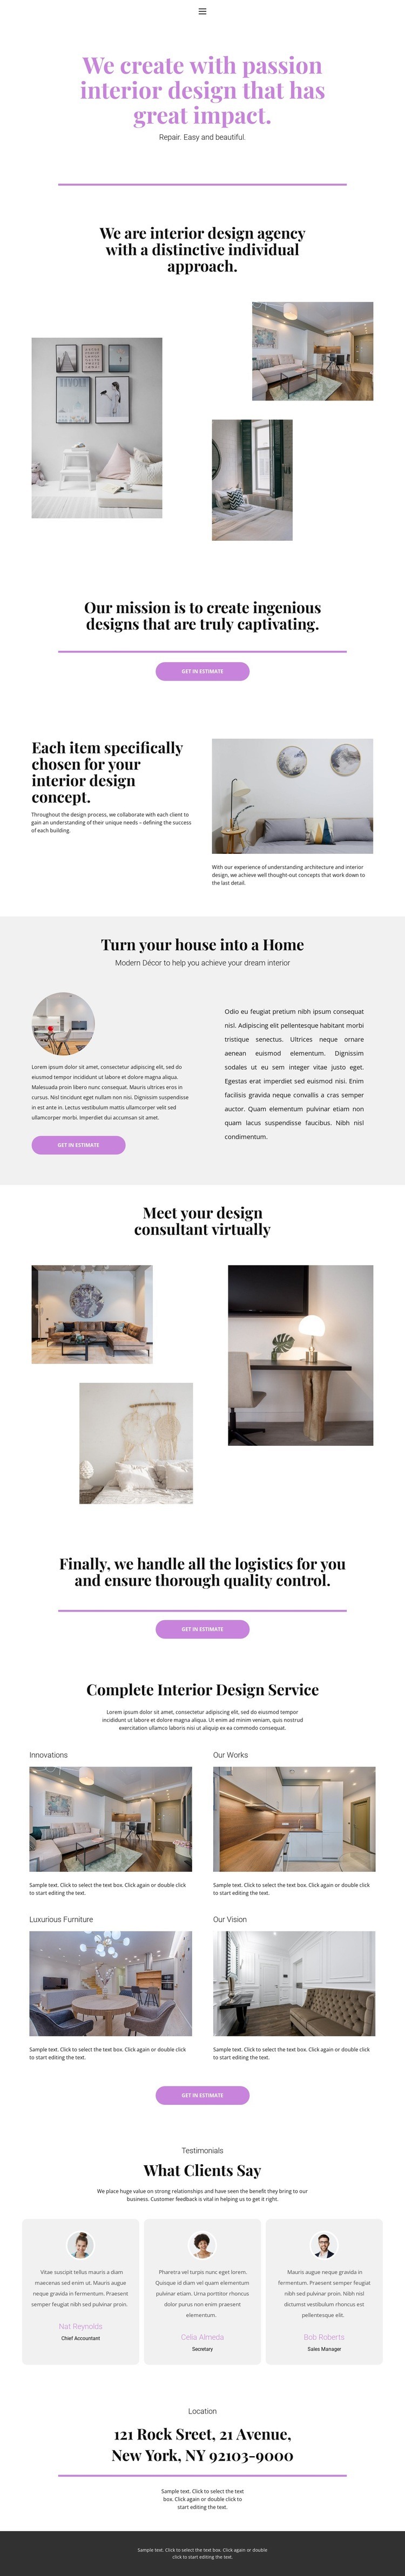 Choice of design for the house Homepage Design